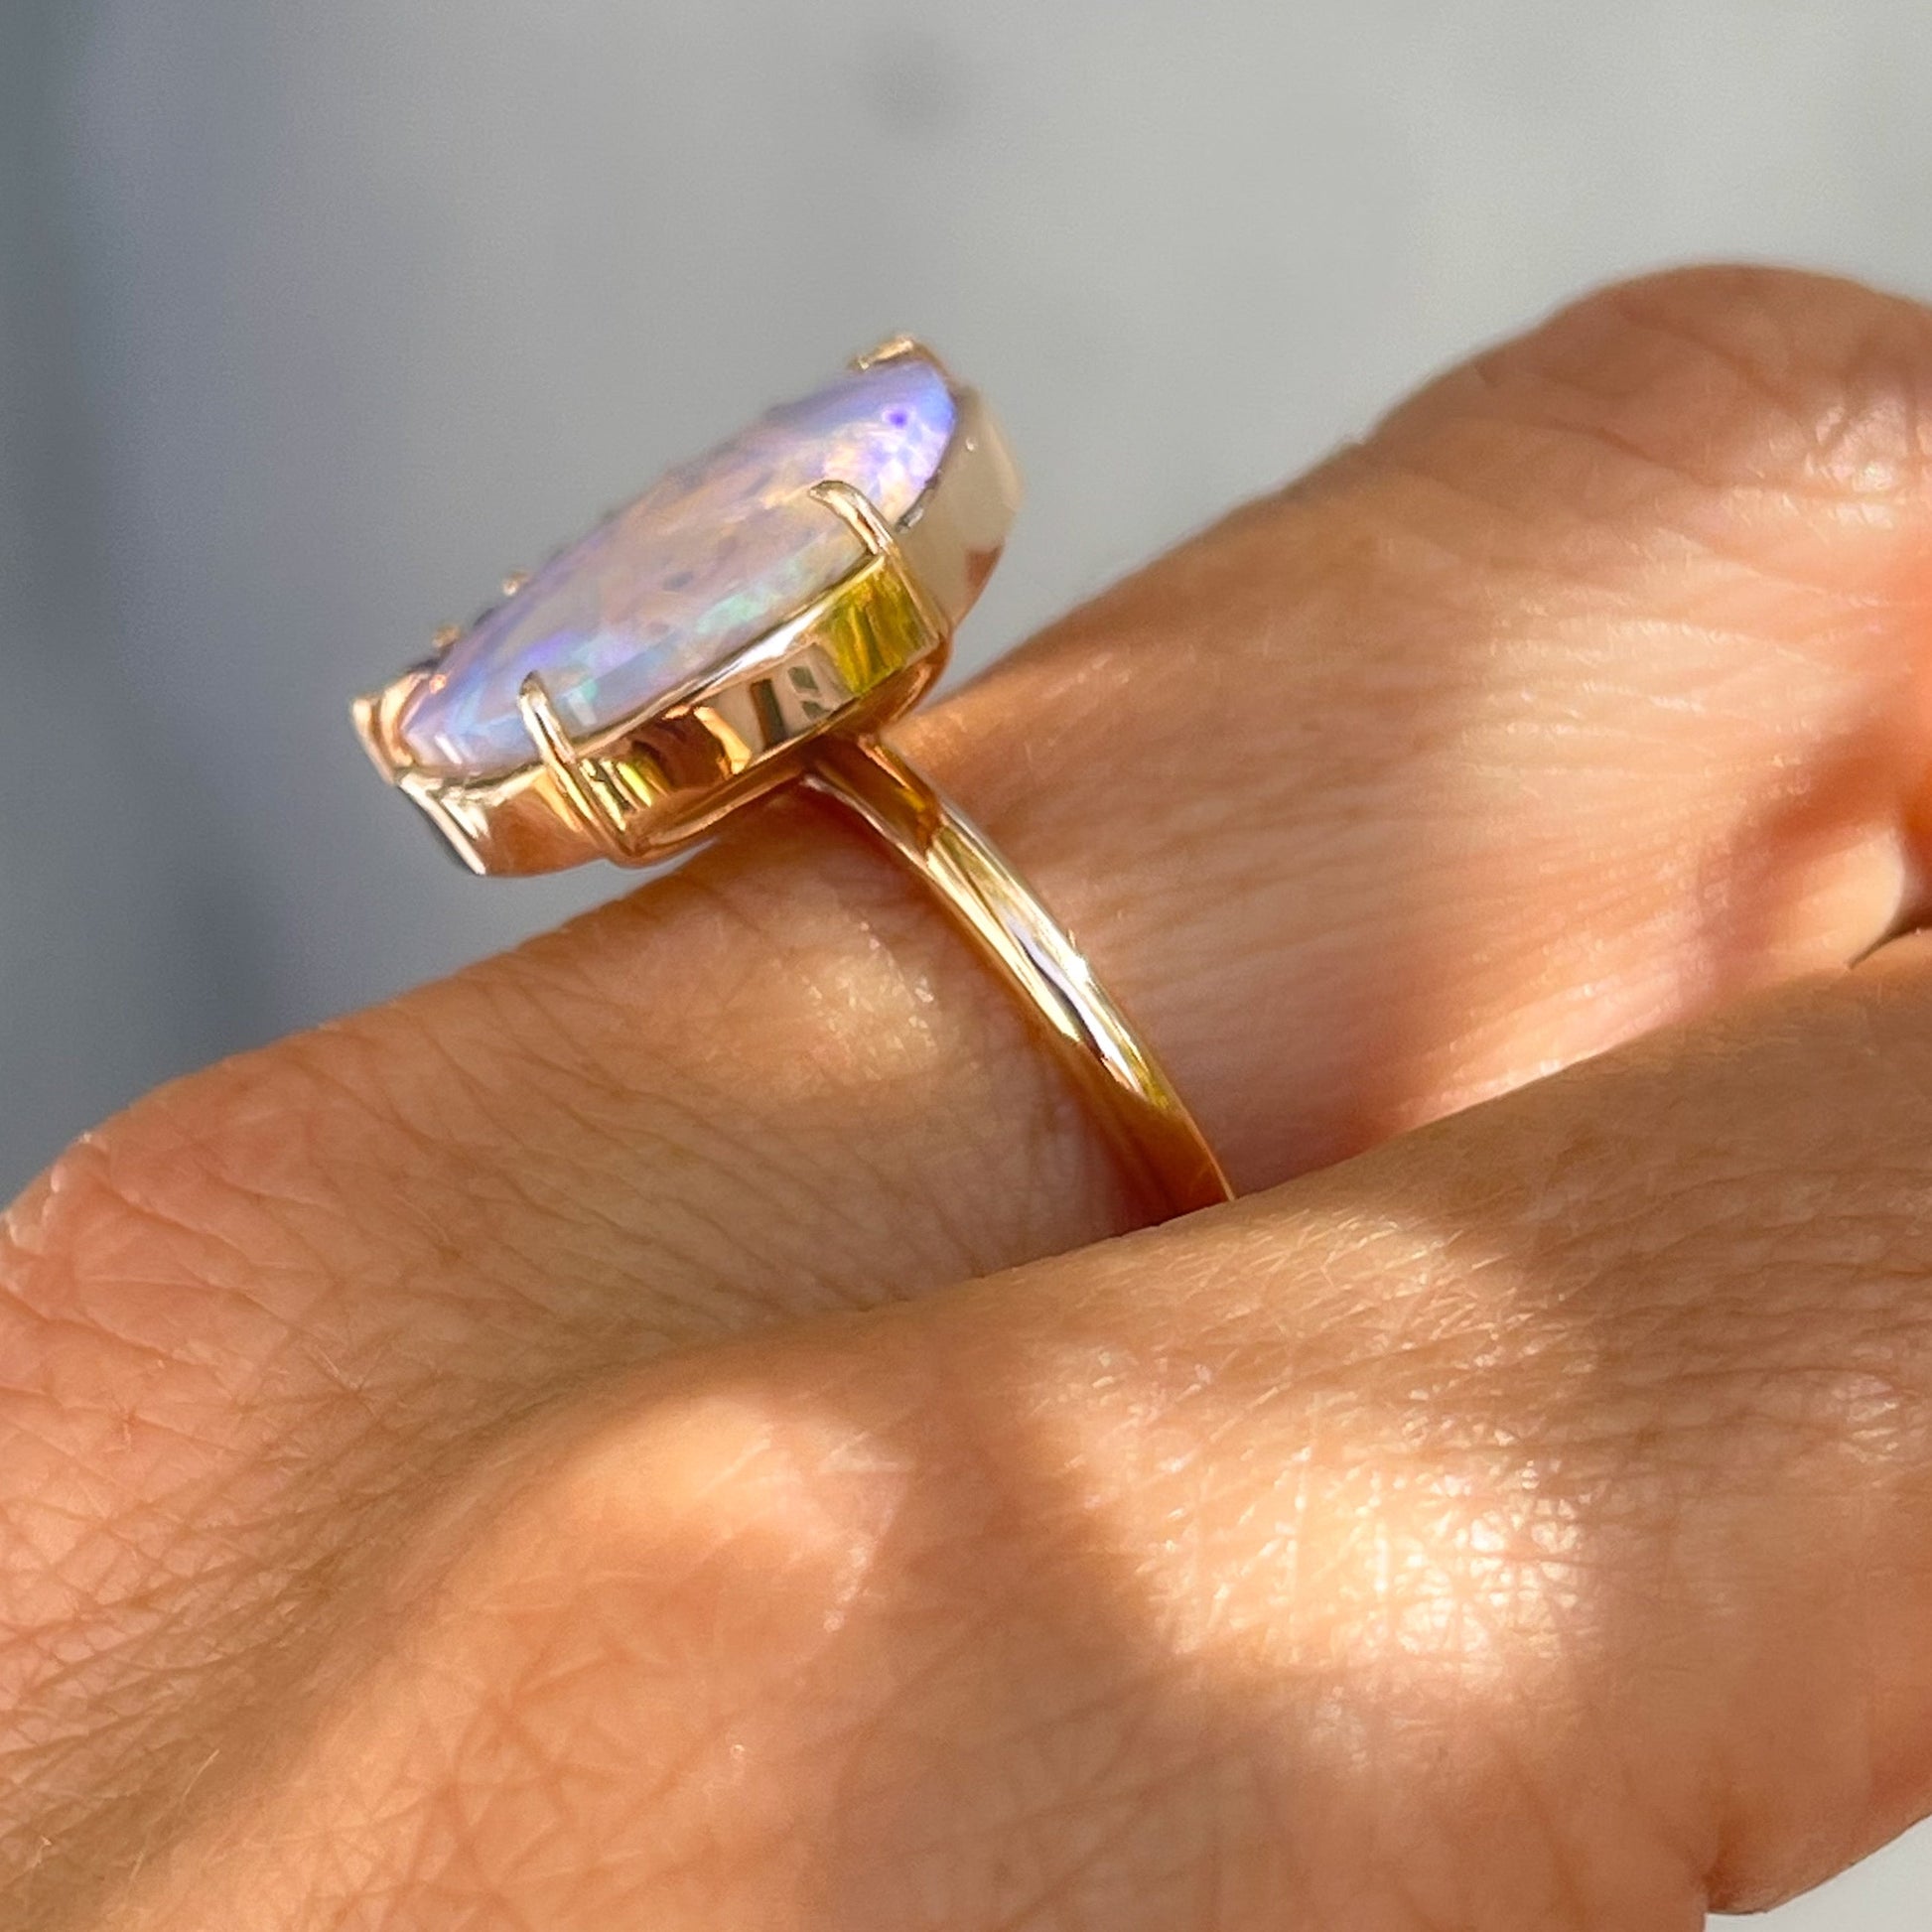 Profile shot of an Australian Opal Ring by NIXIN Jewelry. The image shows the claw prong setting of the natural opal stone.